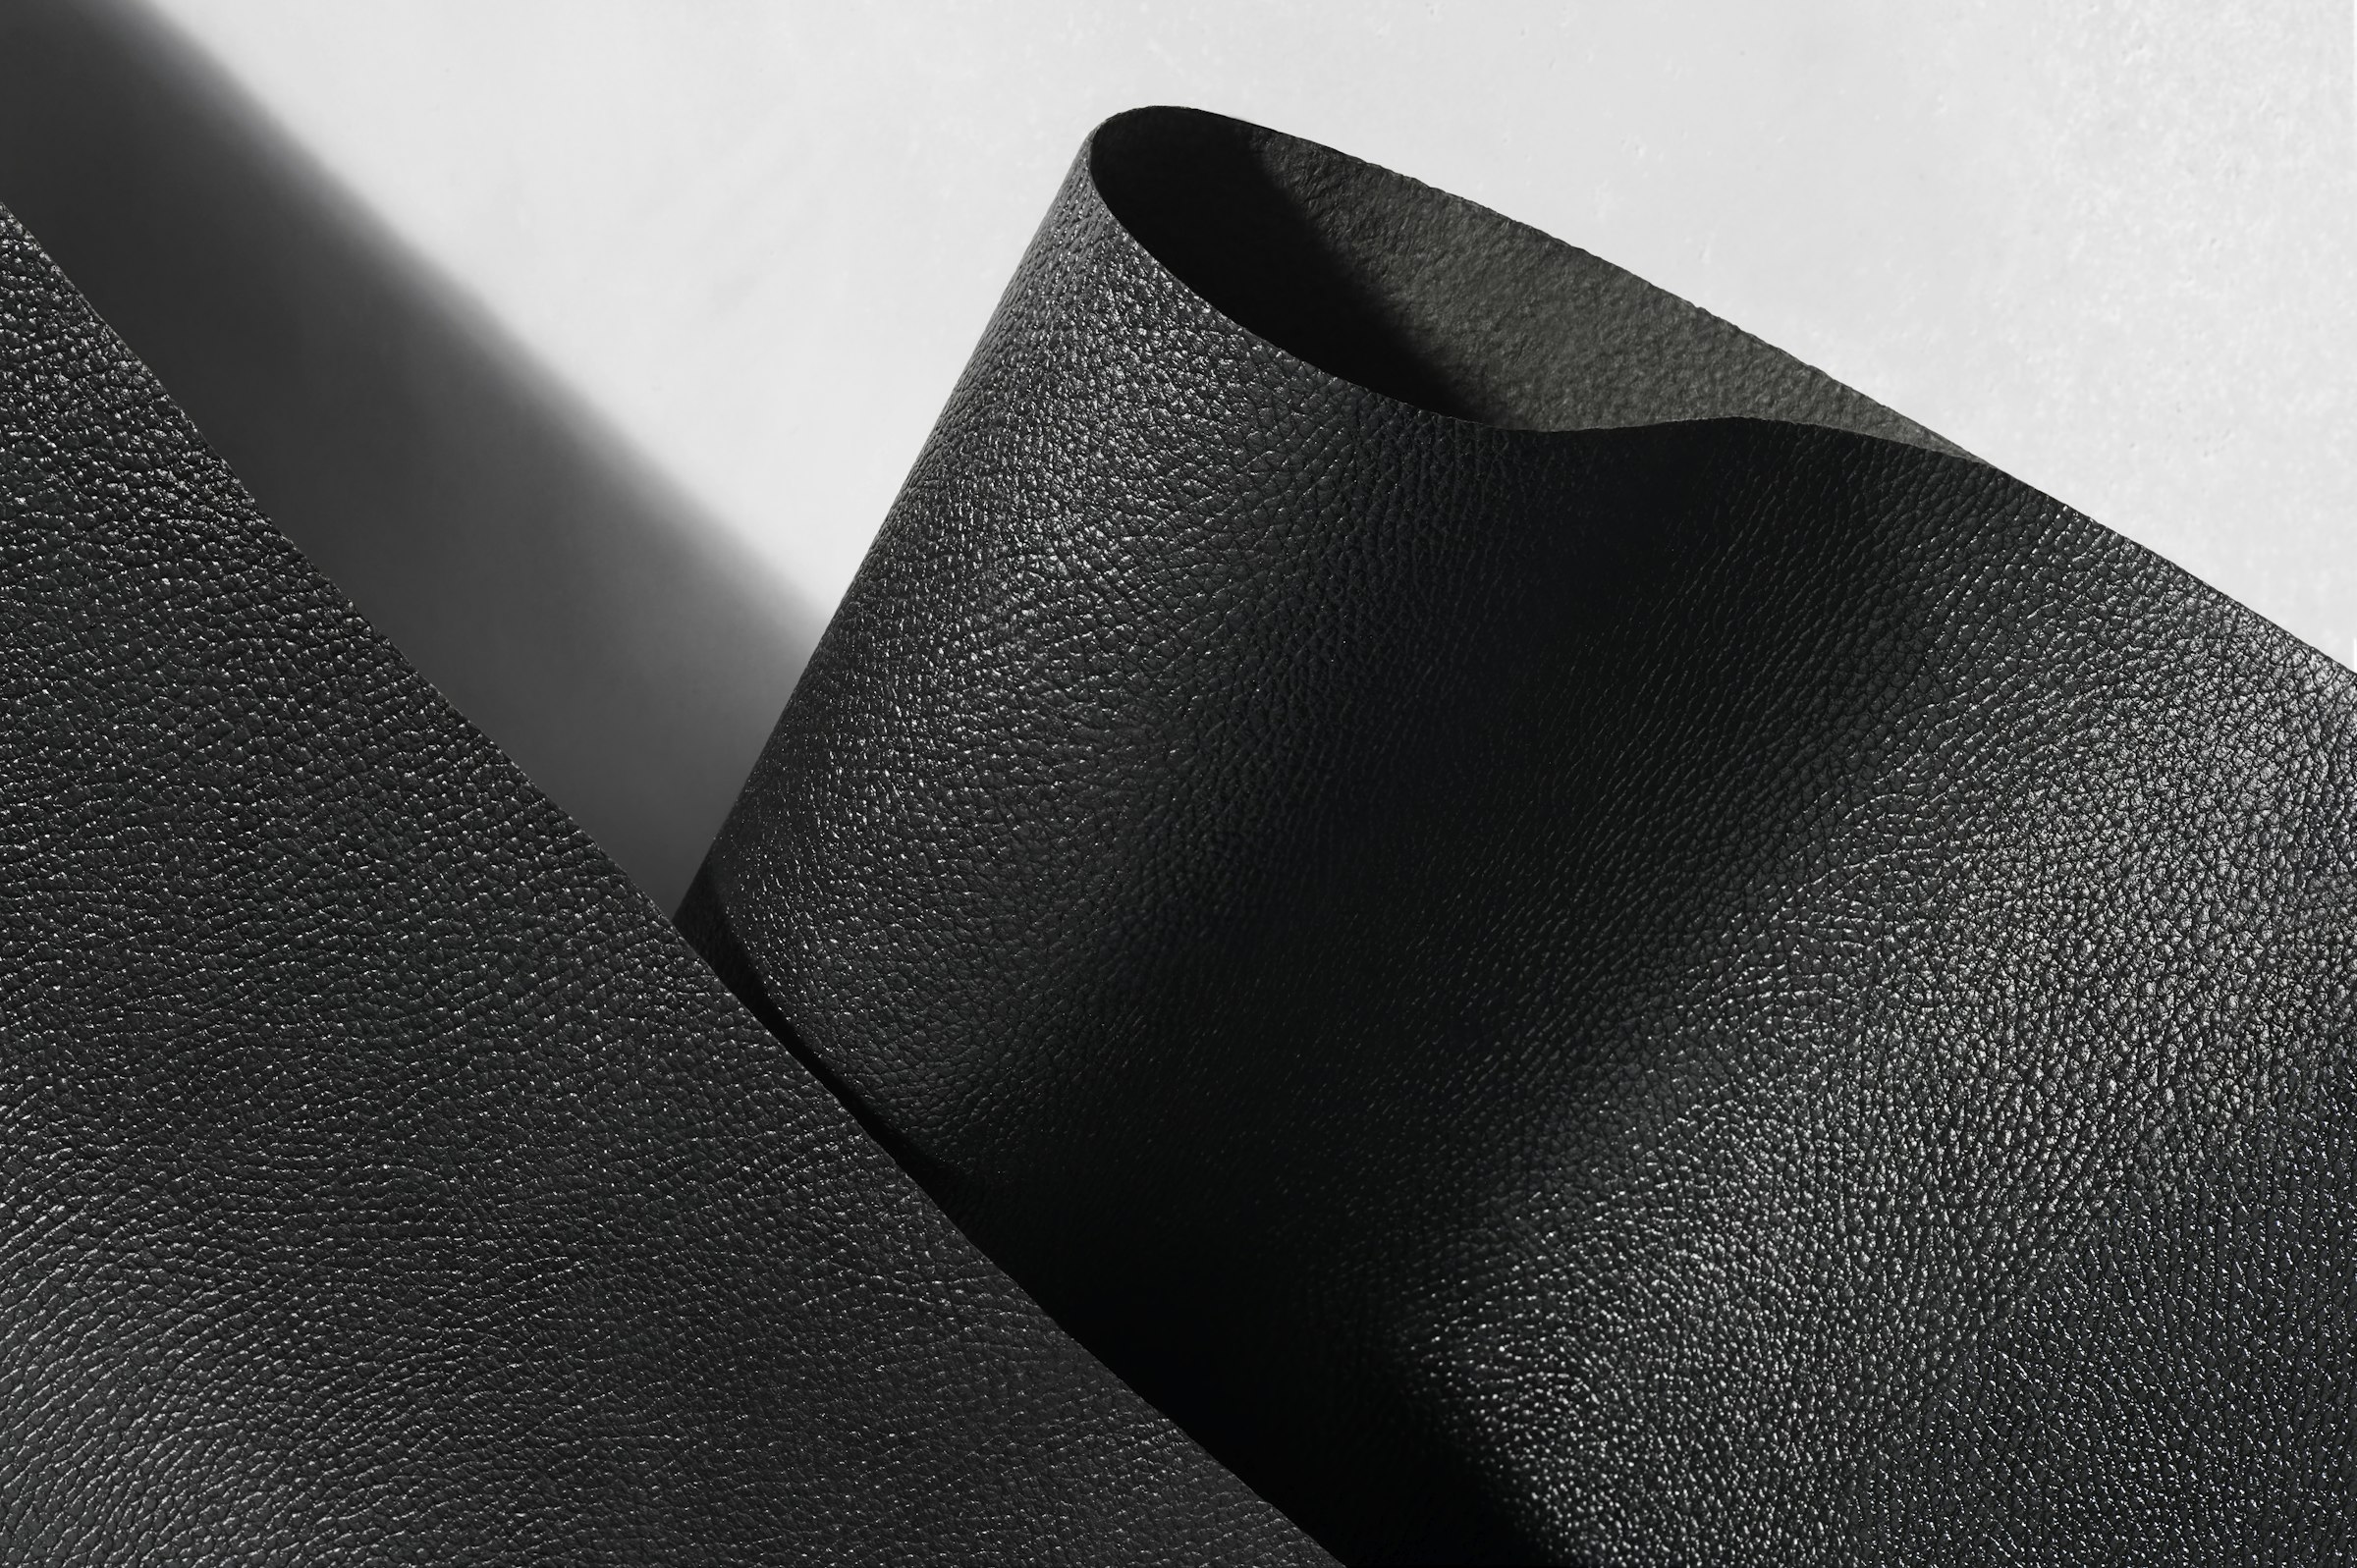 The texture is indistinguishable from animal derived leather in appearance alone